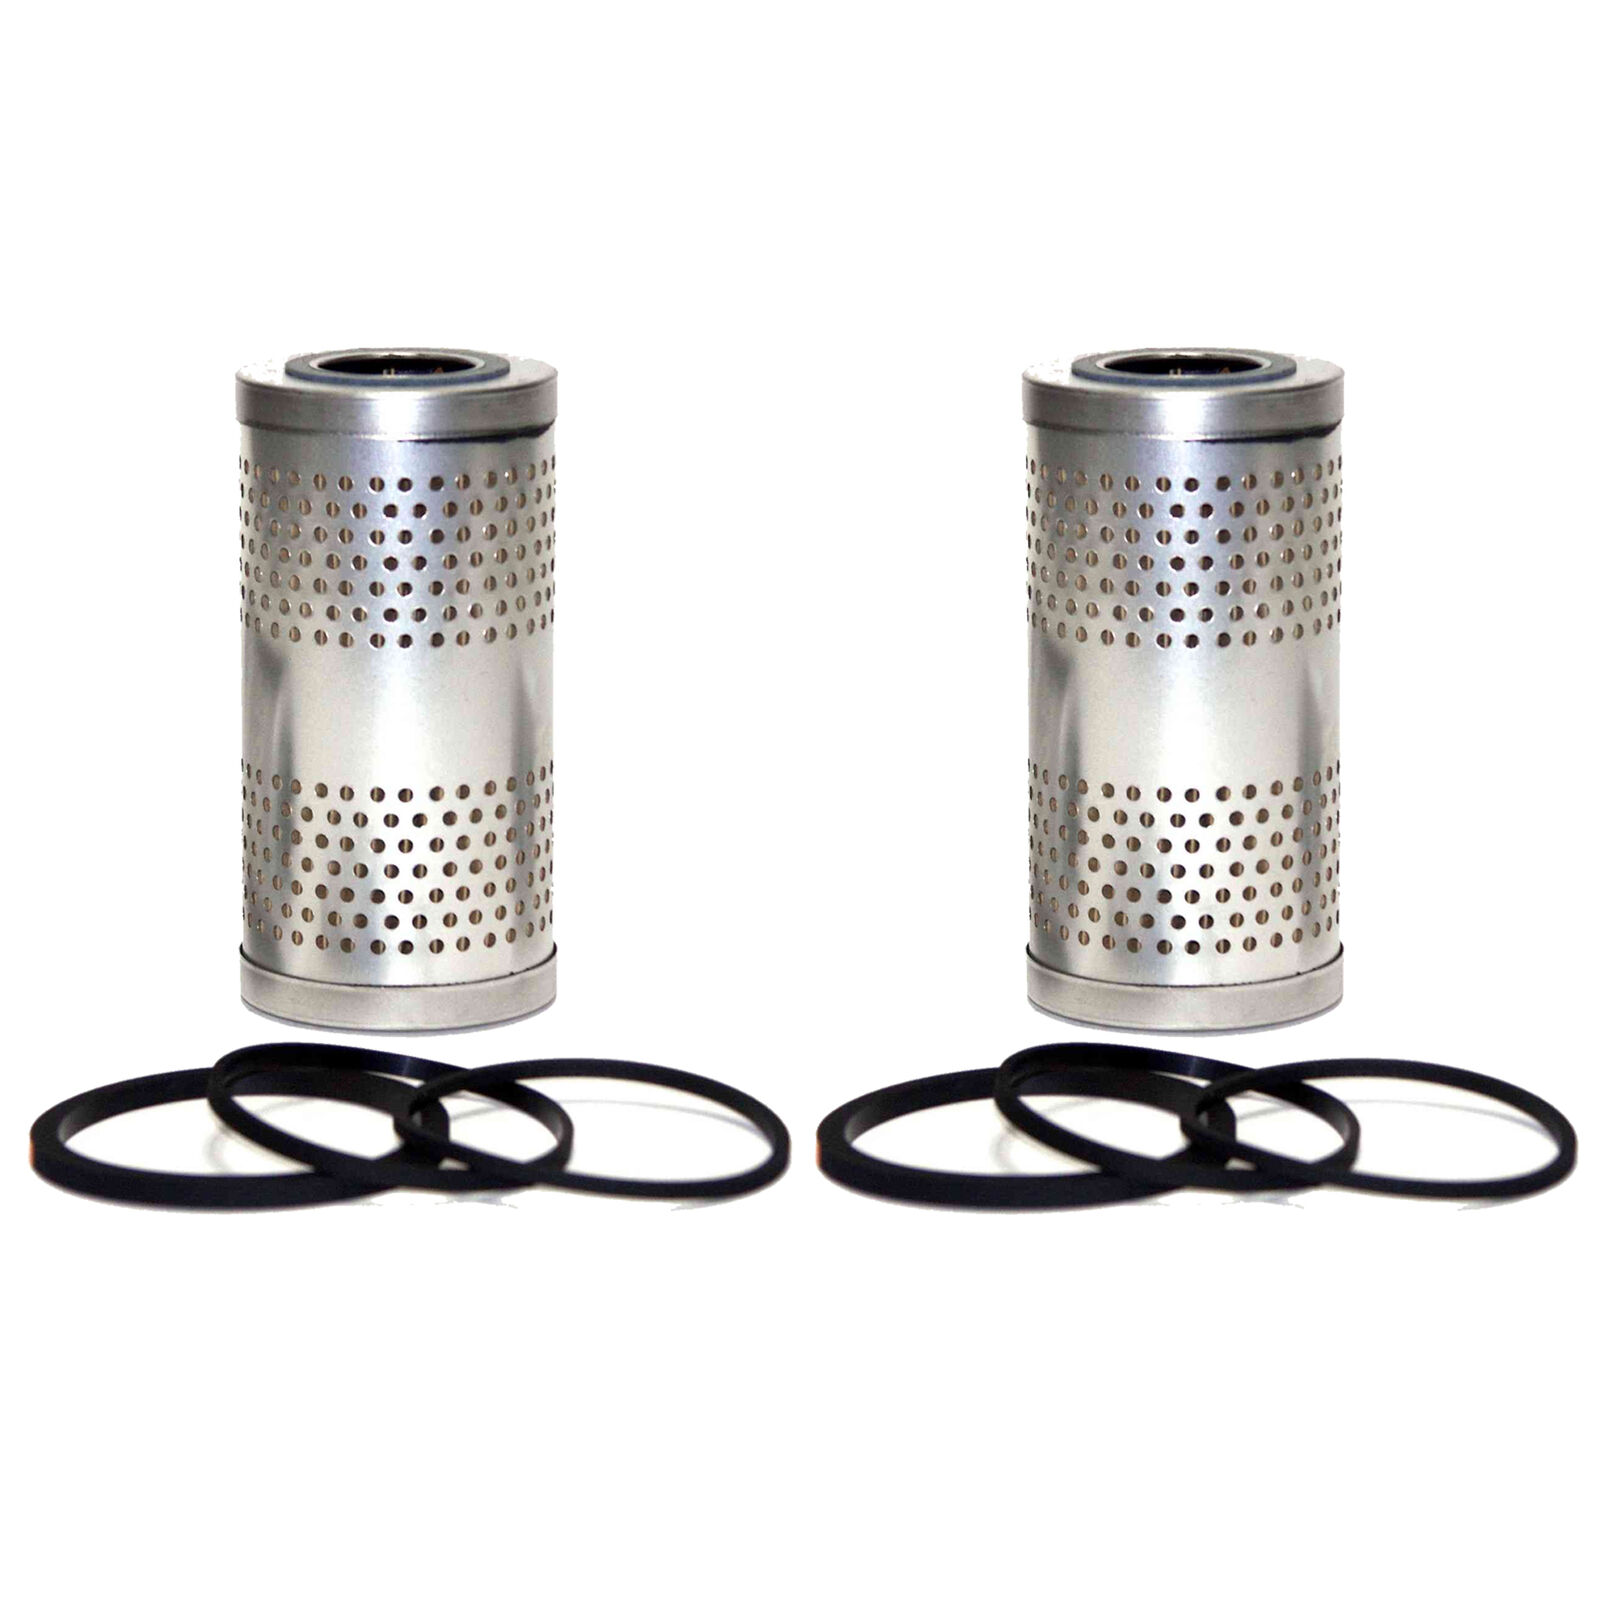 Wix Pair Set of 2 Engine Oil Filters (Cartridge Lube Metal Canister)